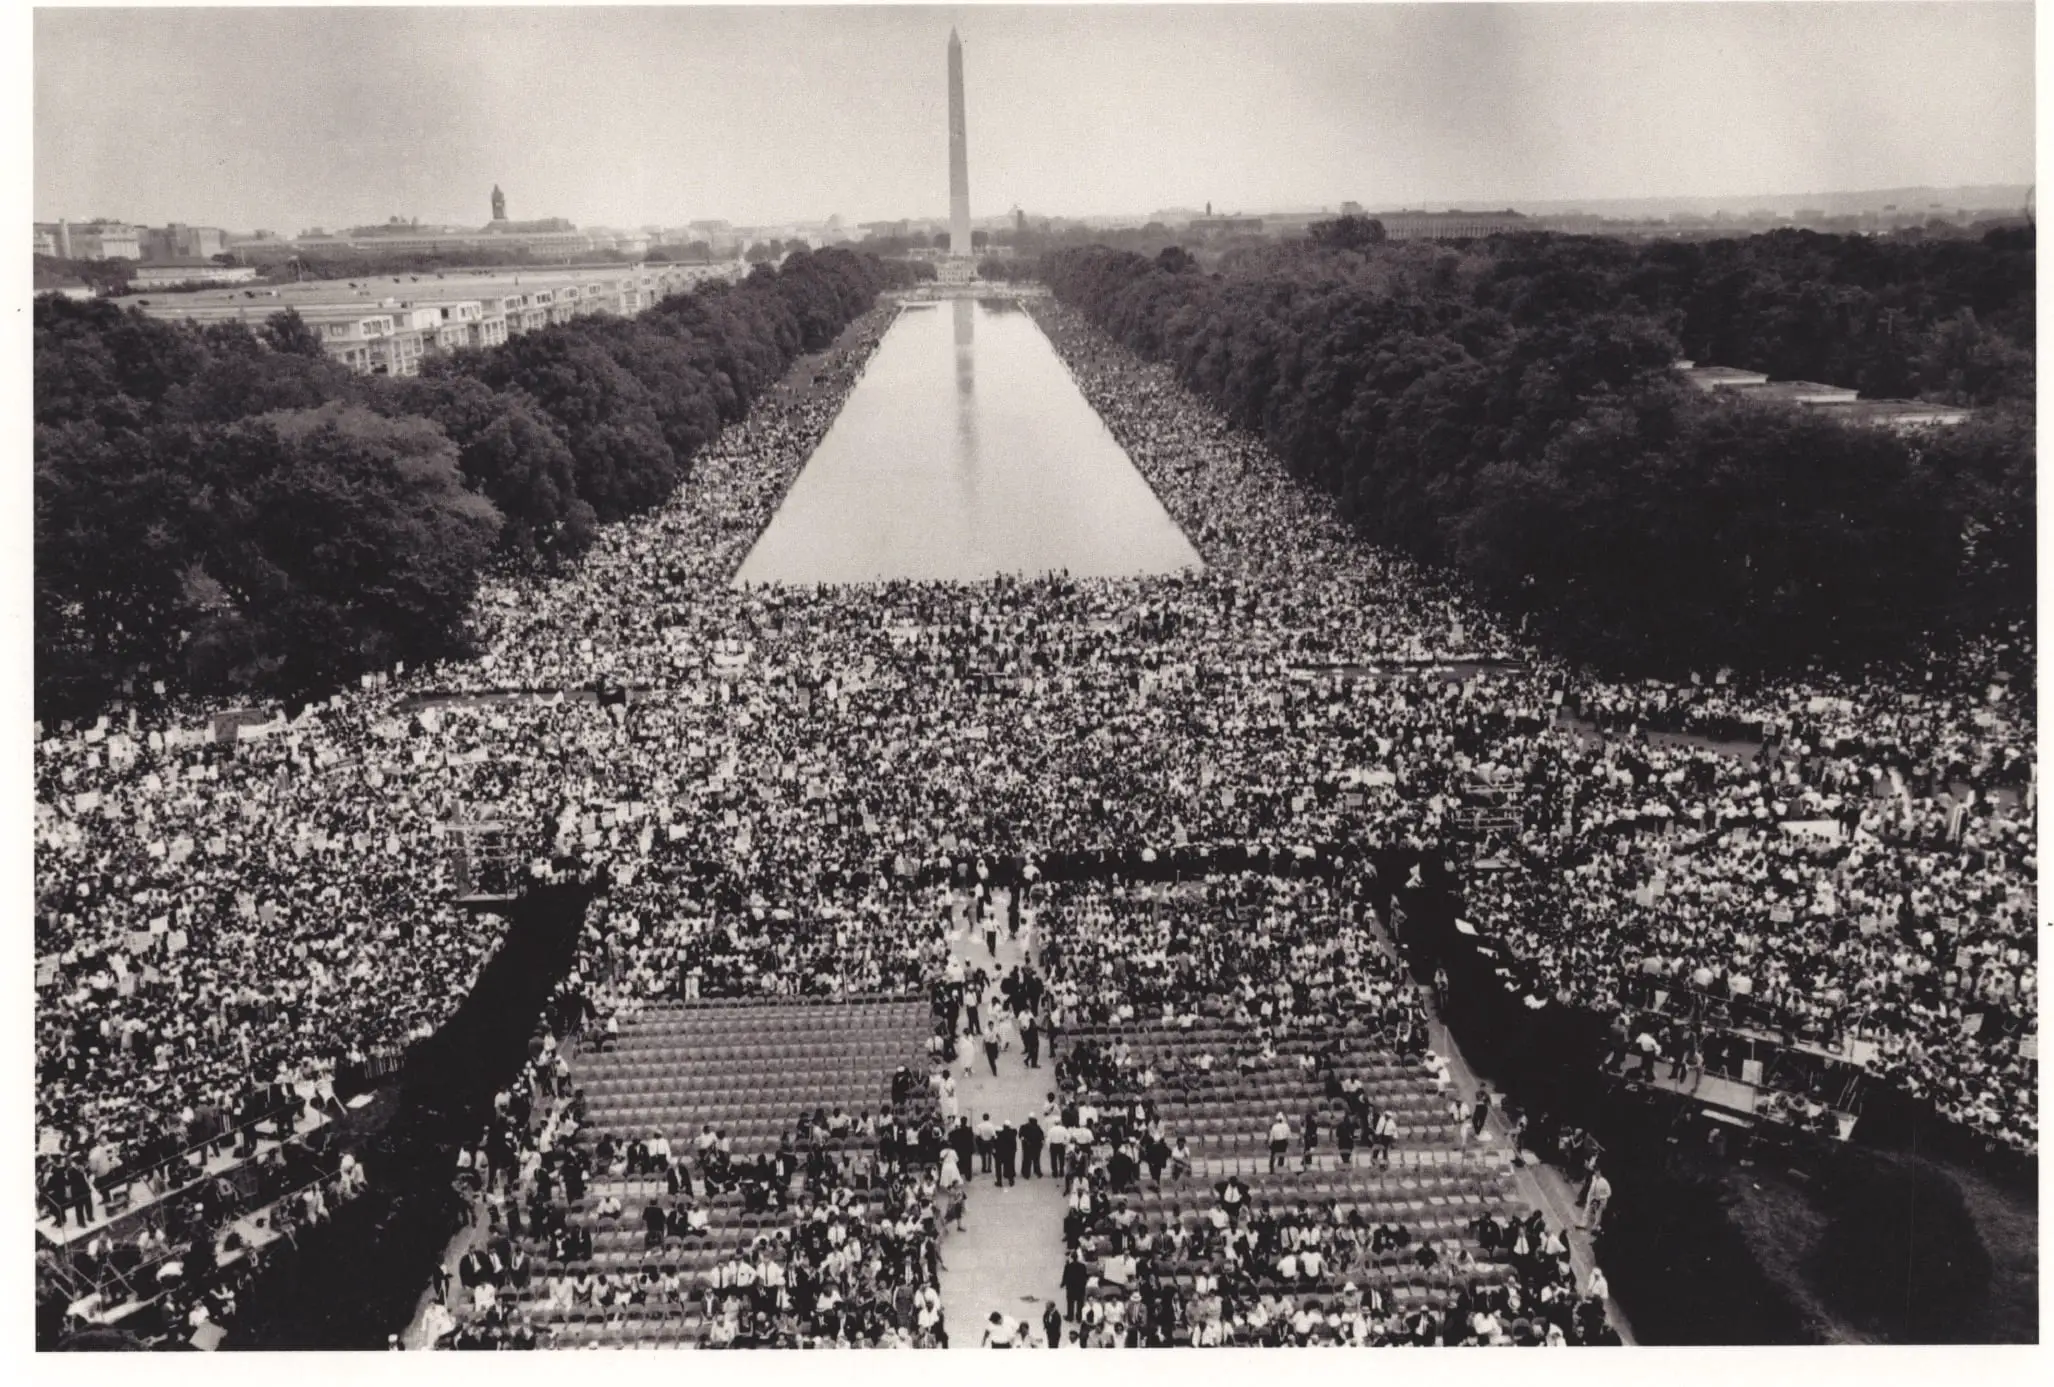 March on Washington for Jobs and Freedom (August 28th, 1963)